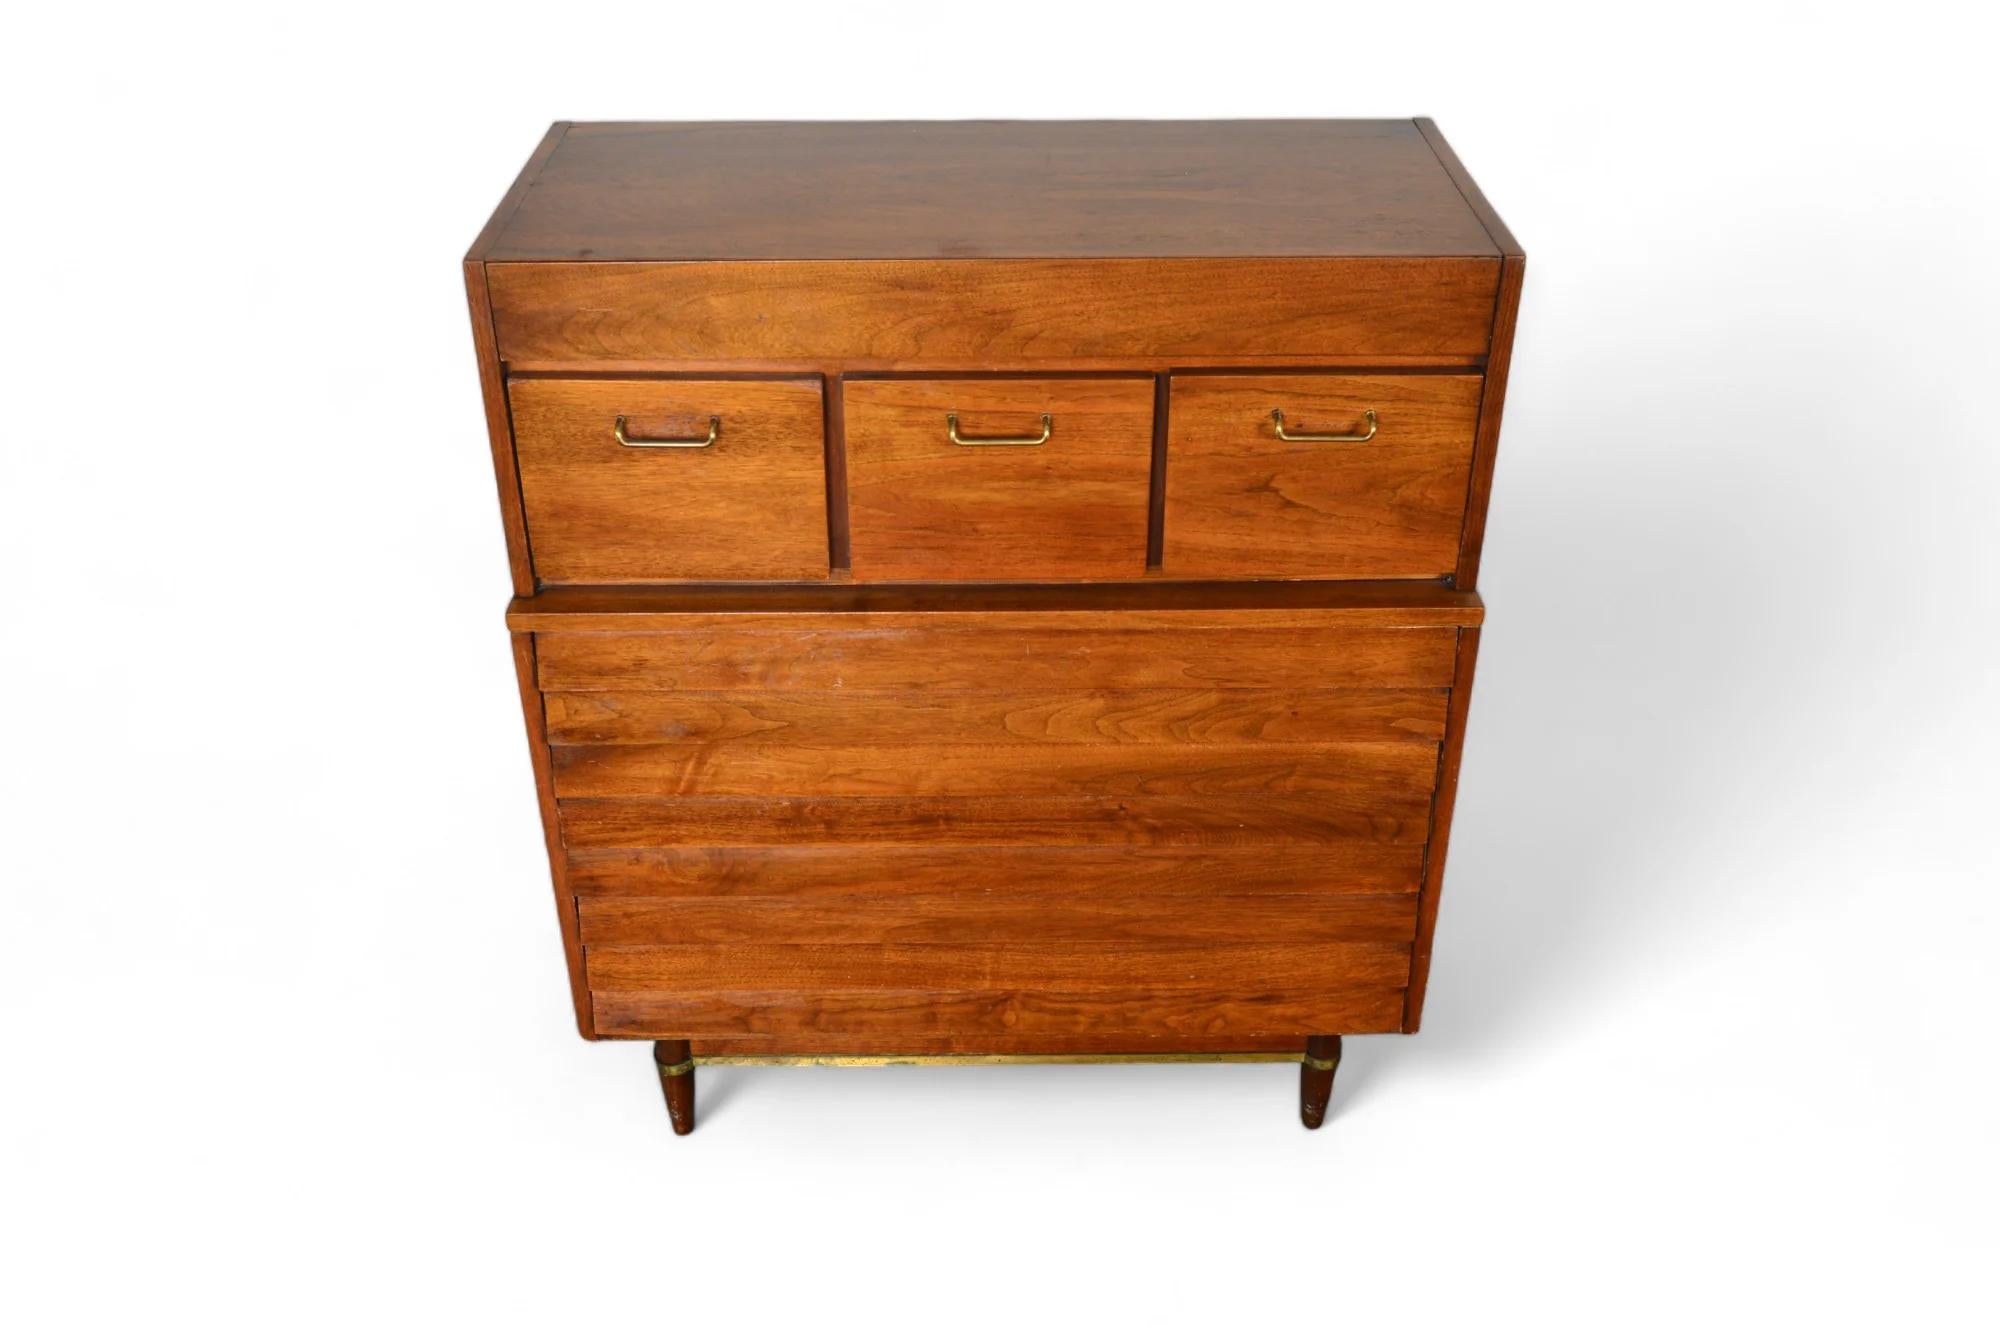 This magnificent highboy dresser was designed by Merton Gershun American of Martinsville in the 1960s for the Dania collection. Crafted in walnut with beautifully patinated brass hardware.

Origin: USA
Designer: Merton Gershun
Manufacturer: American